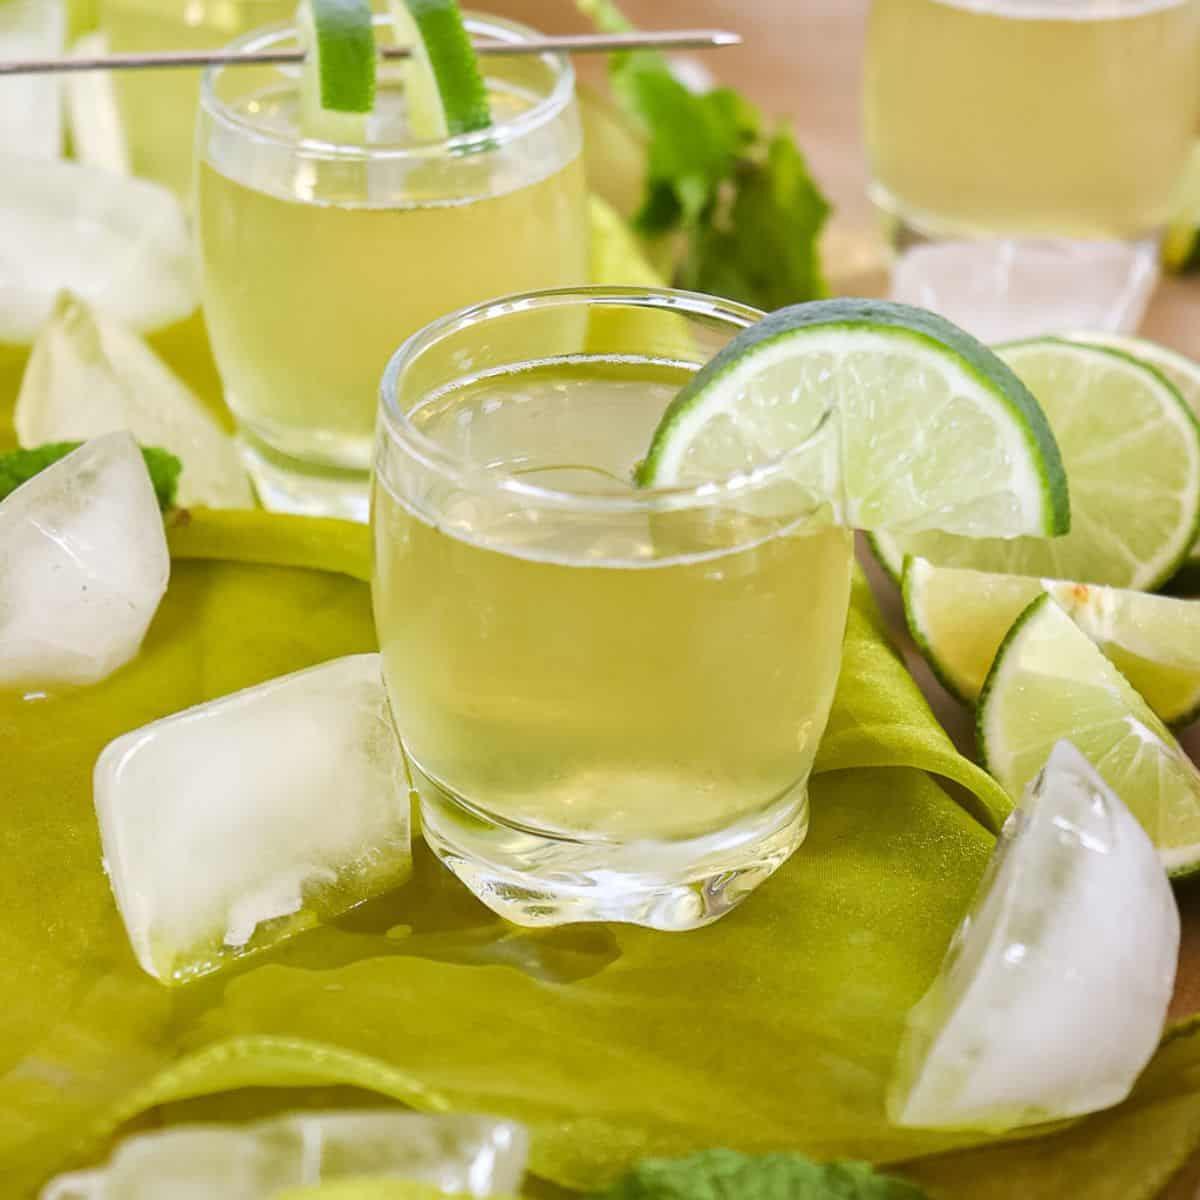 green tea shots on a table with ice cubes around them and a lime wedge on the rim of the shot glass